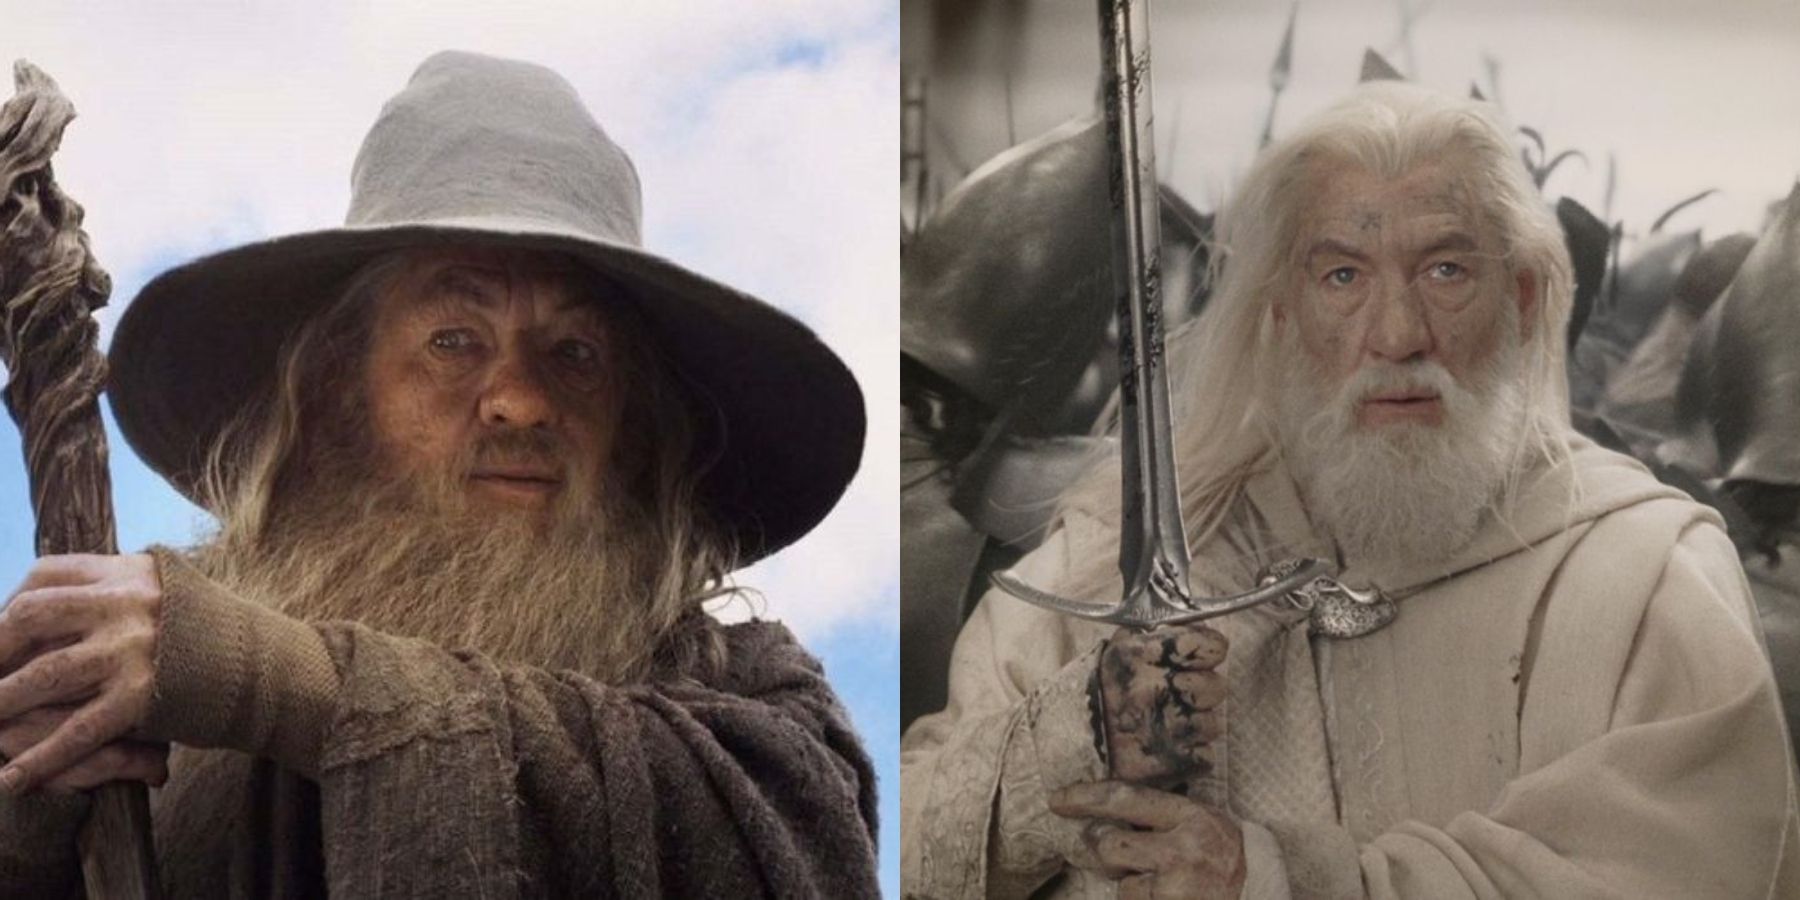 gandalf the grey lord of the rings